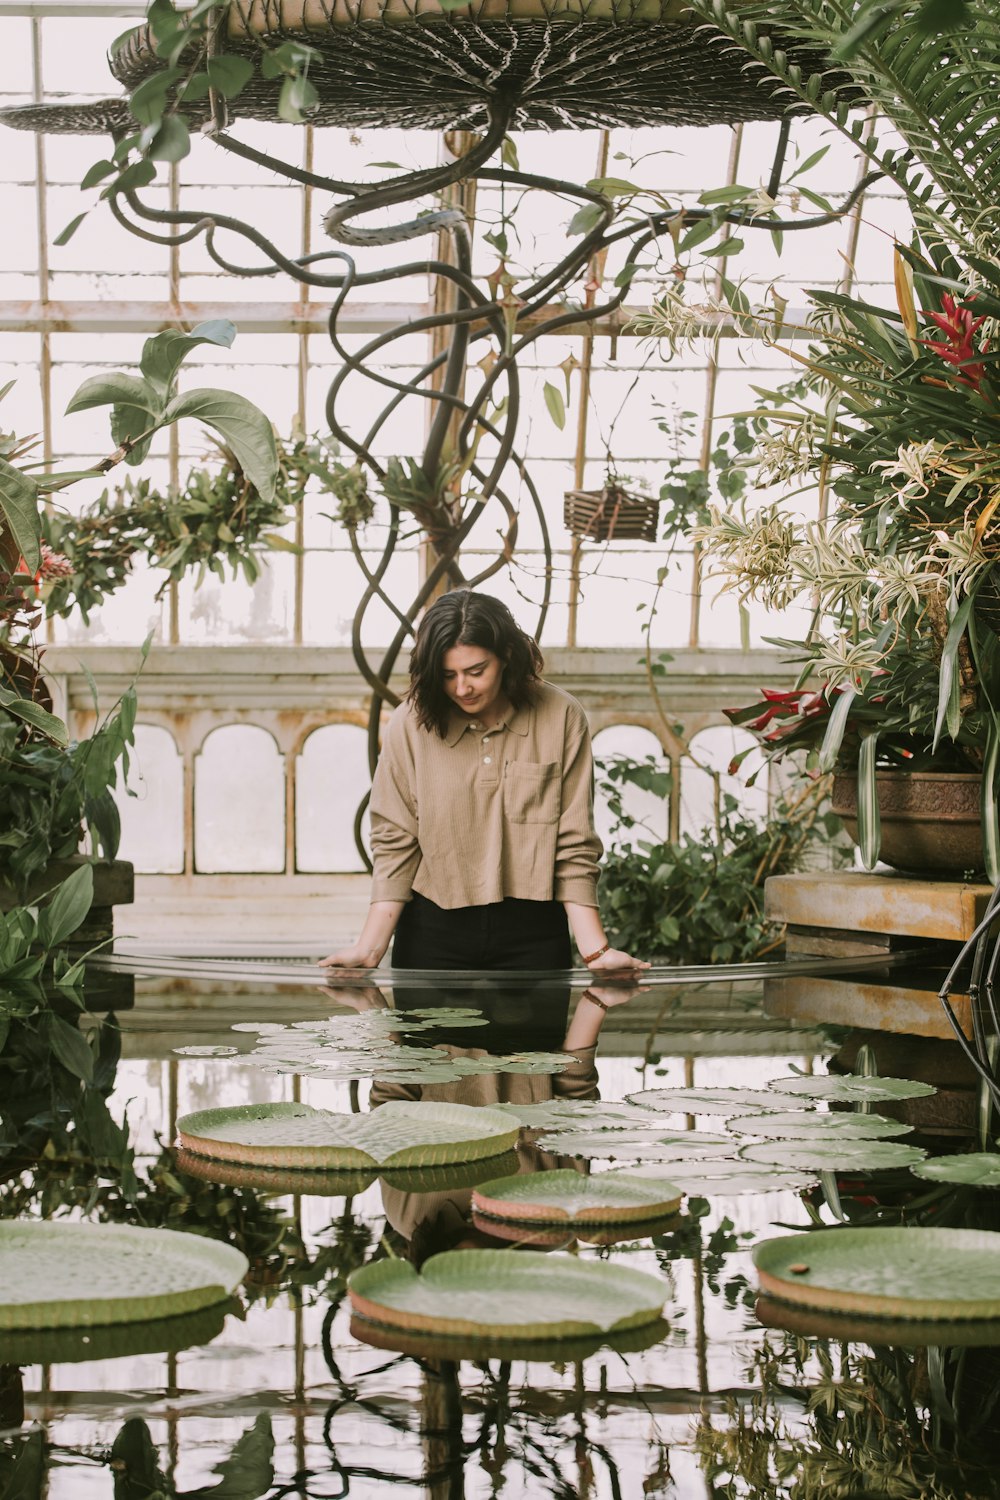 standing woman leaning on fountain with lily pads